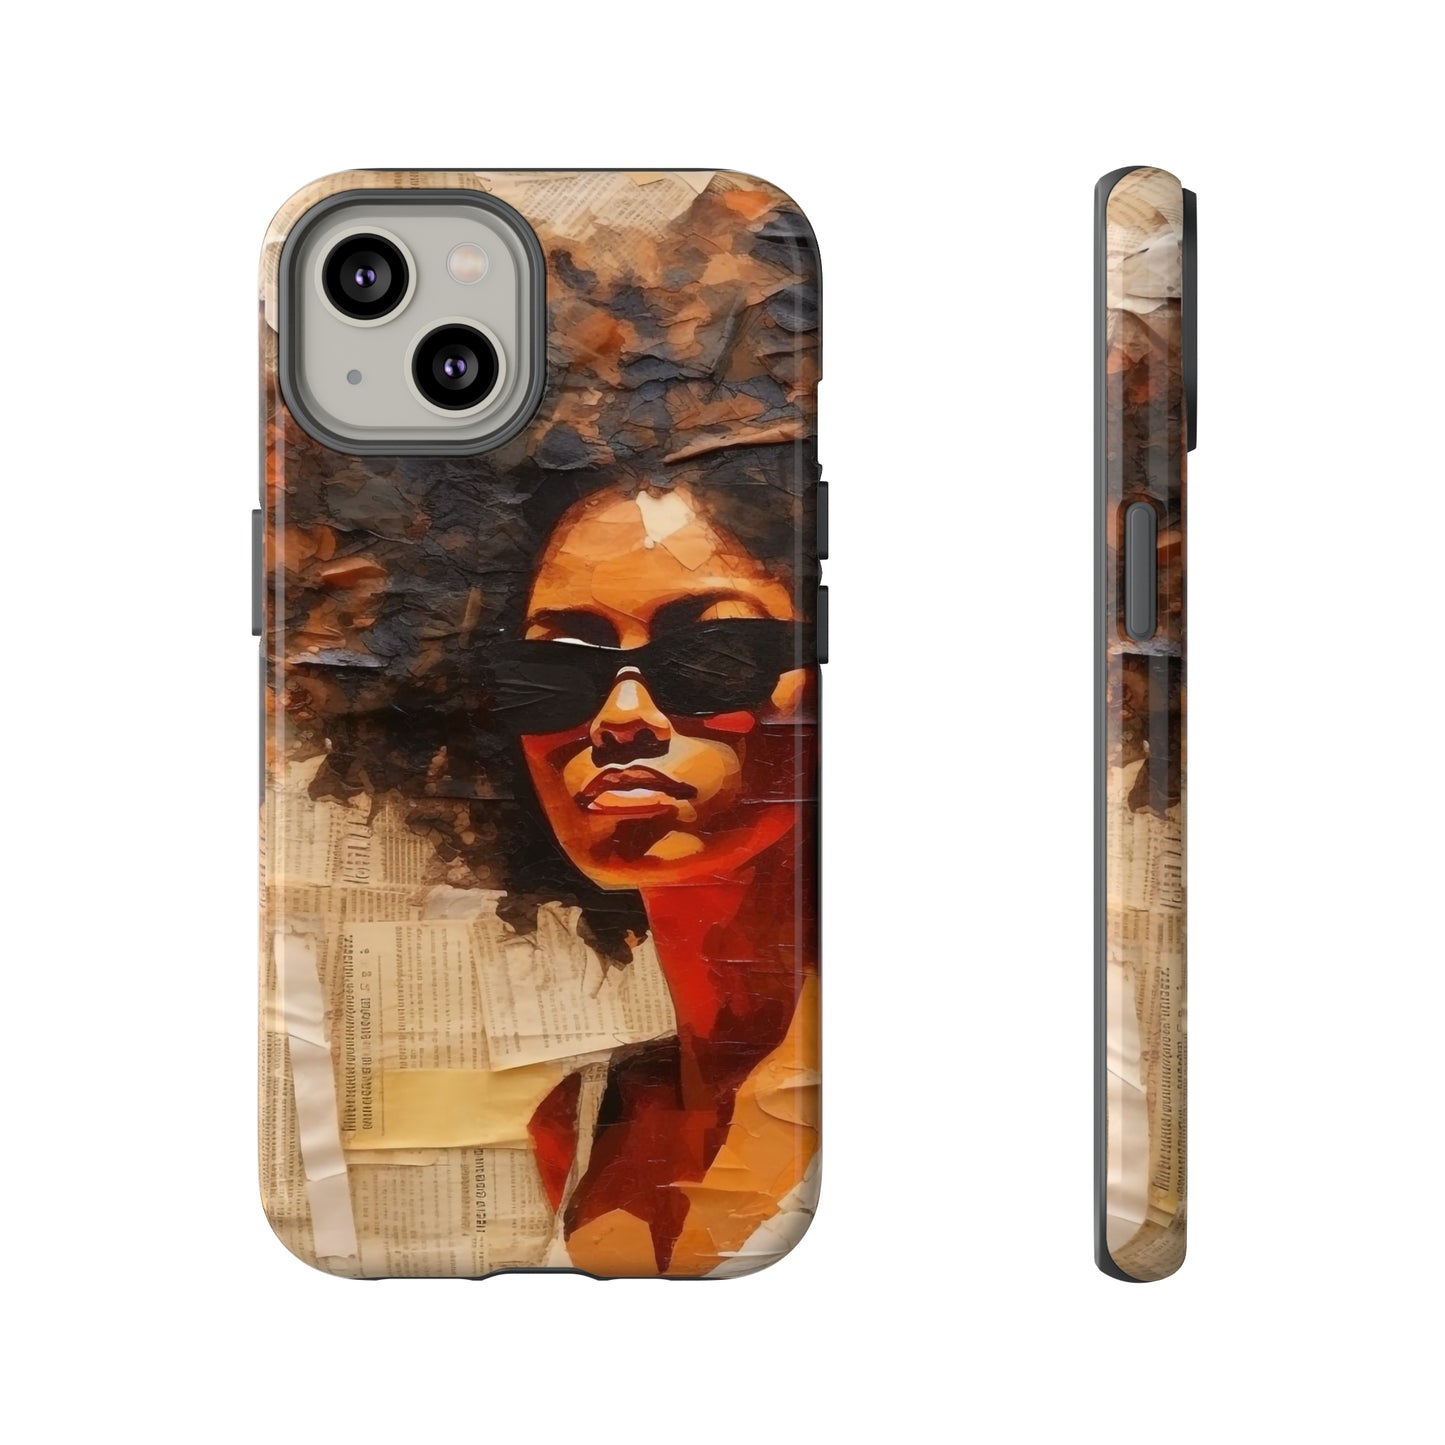 Afro Paper Collage Phone Case